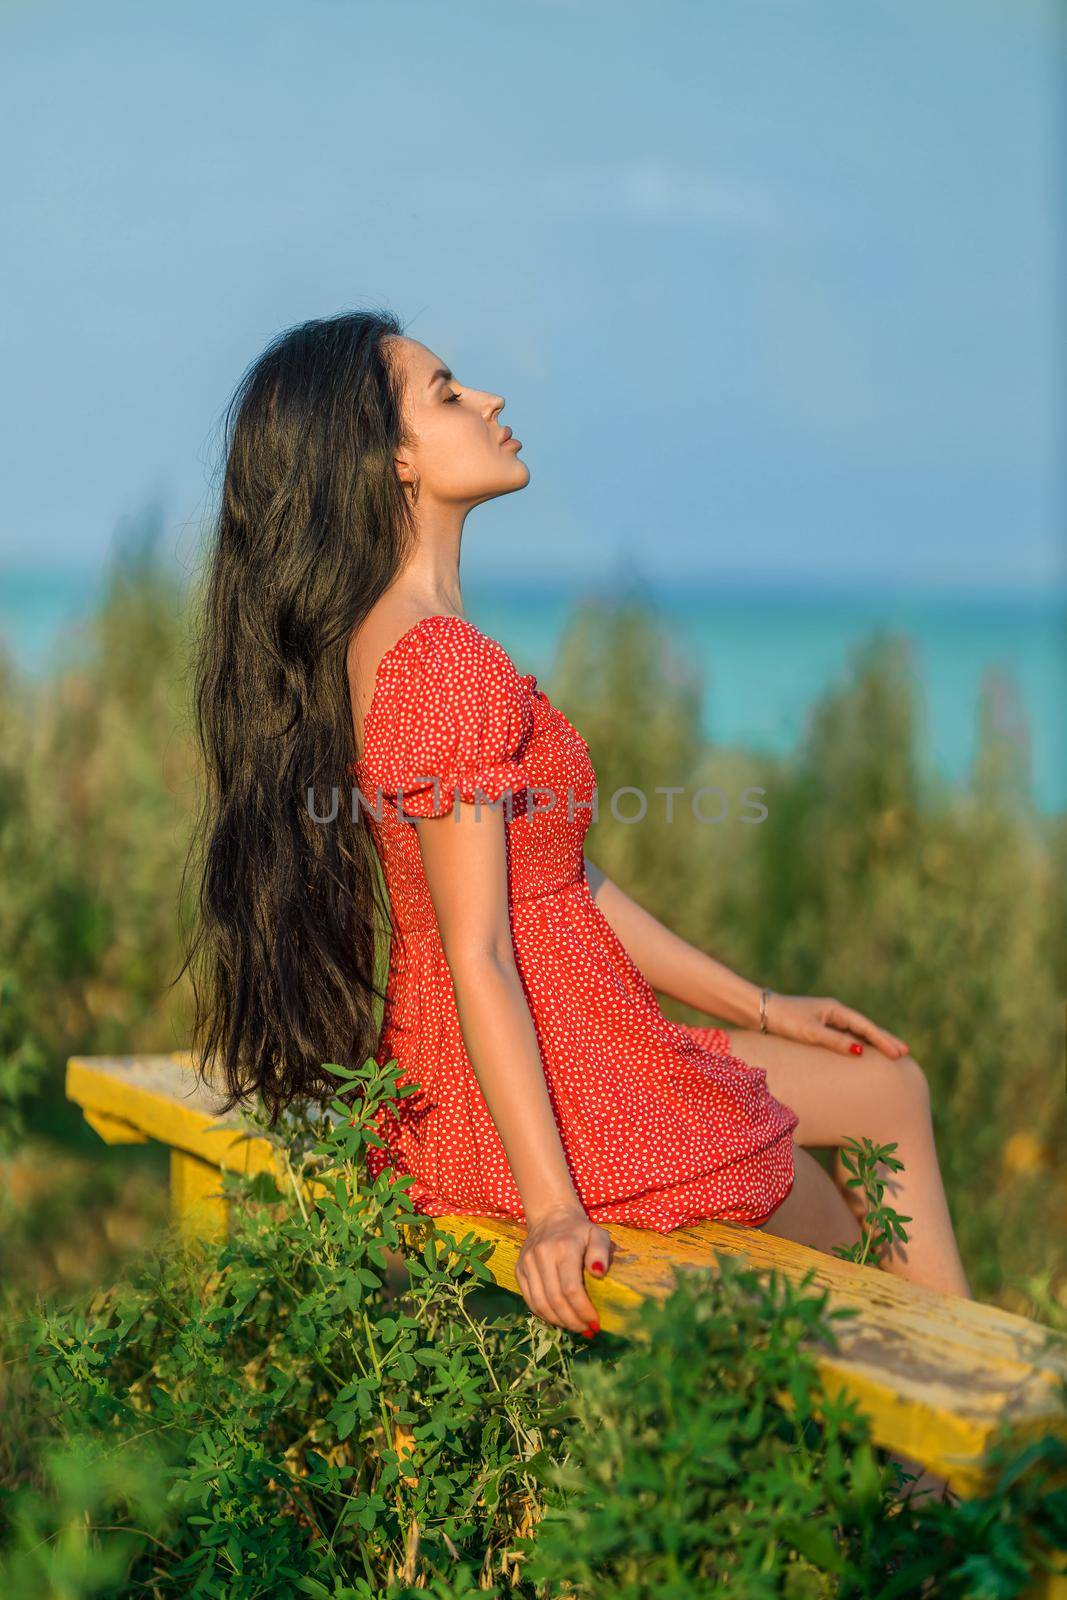 Brunette girl in a red dress with small polka dots on a bench in a meadow among wild herbs overlooking the sea